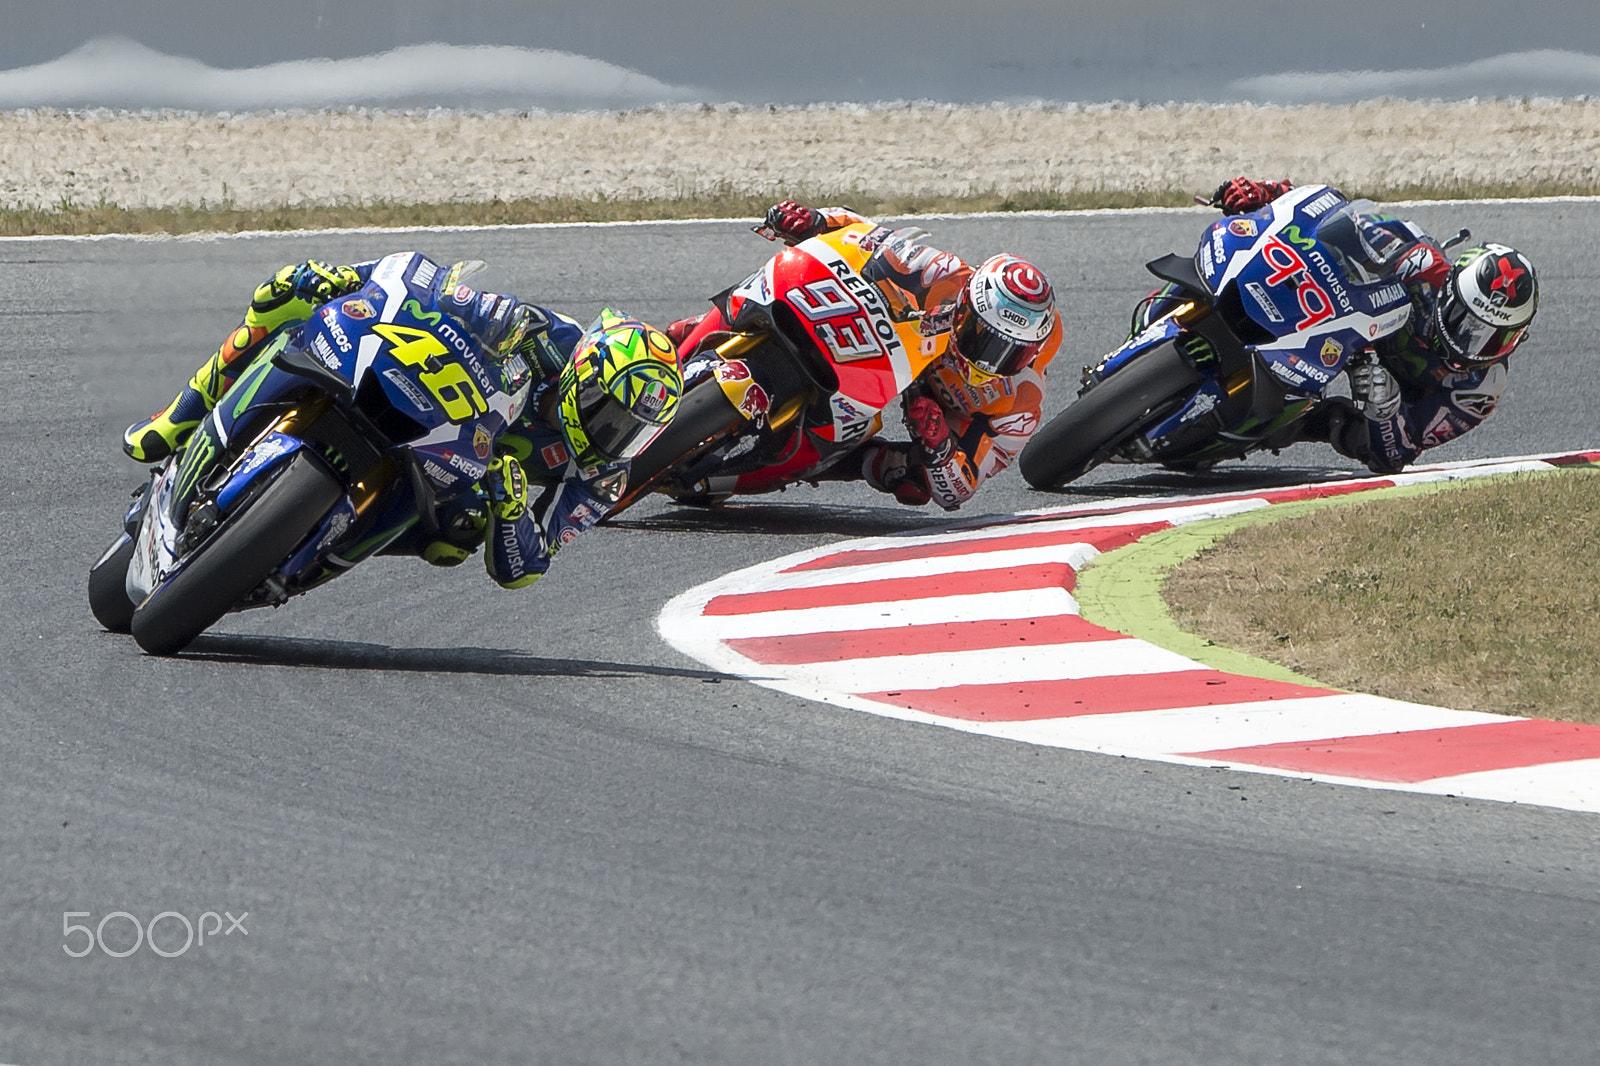 Nikon D4 + Tamron SP 150-600mm F5-6.3 Di VC USD sample photo. Drivers valentino rossi, marquez and lorenzo. monster energy grand prix of catalonia motogp at... photography